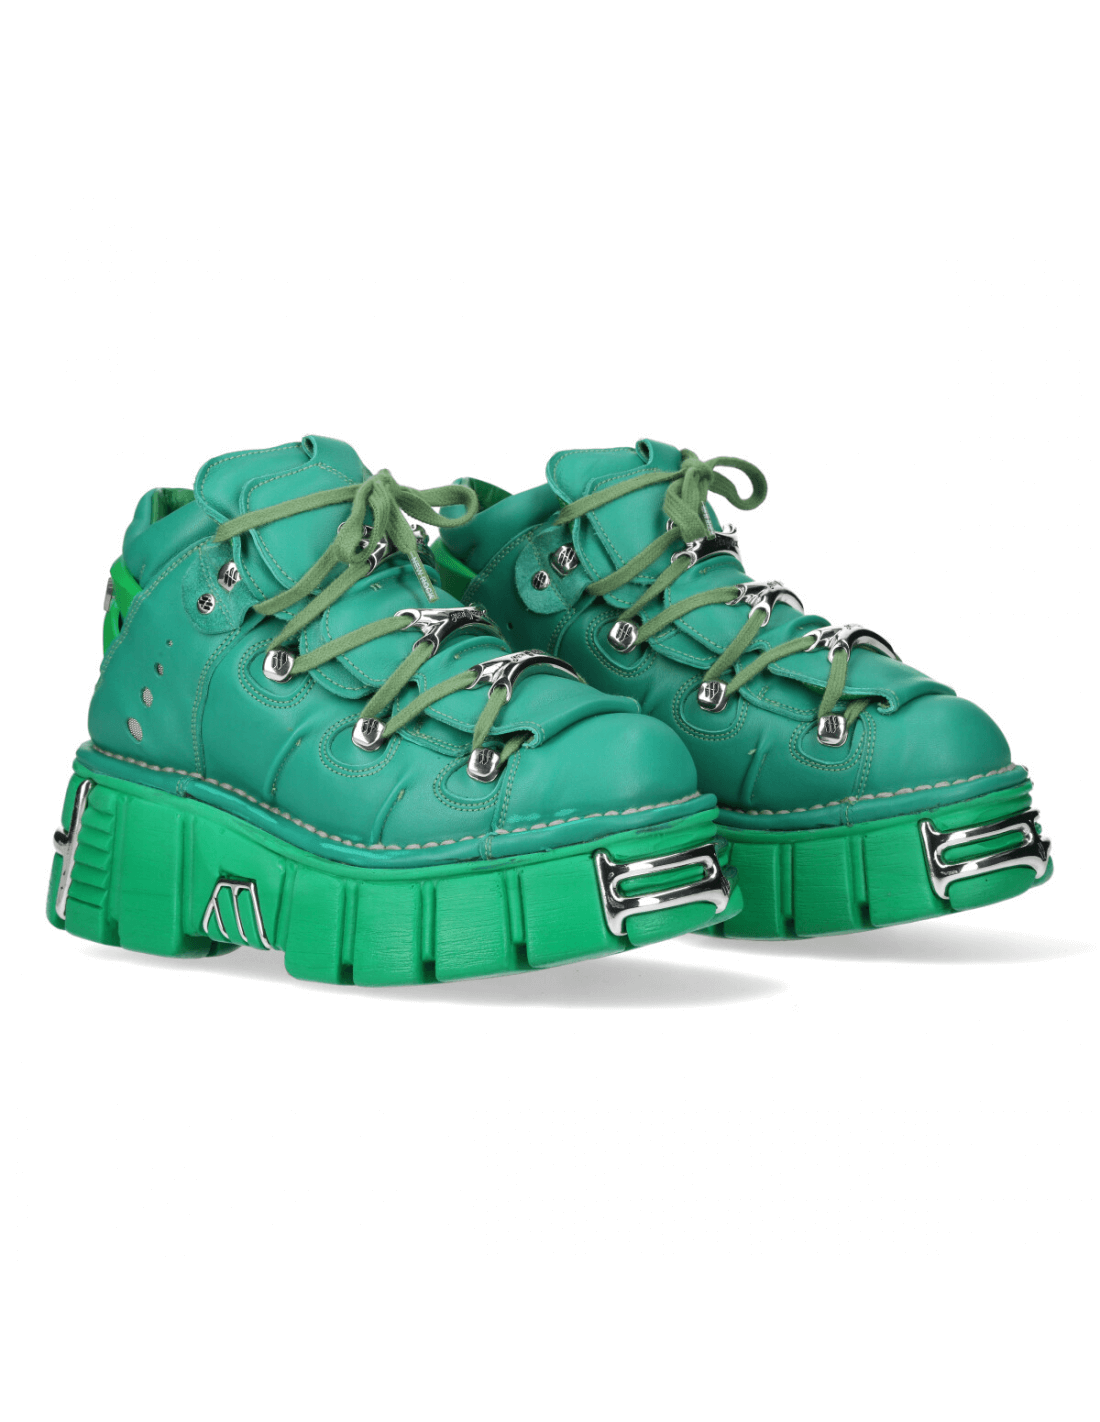 NEW ROCK Green Leather Ankle Boots with Metal Details